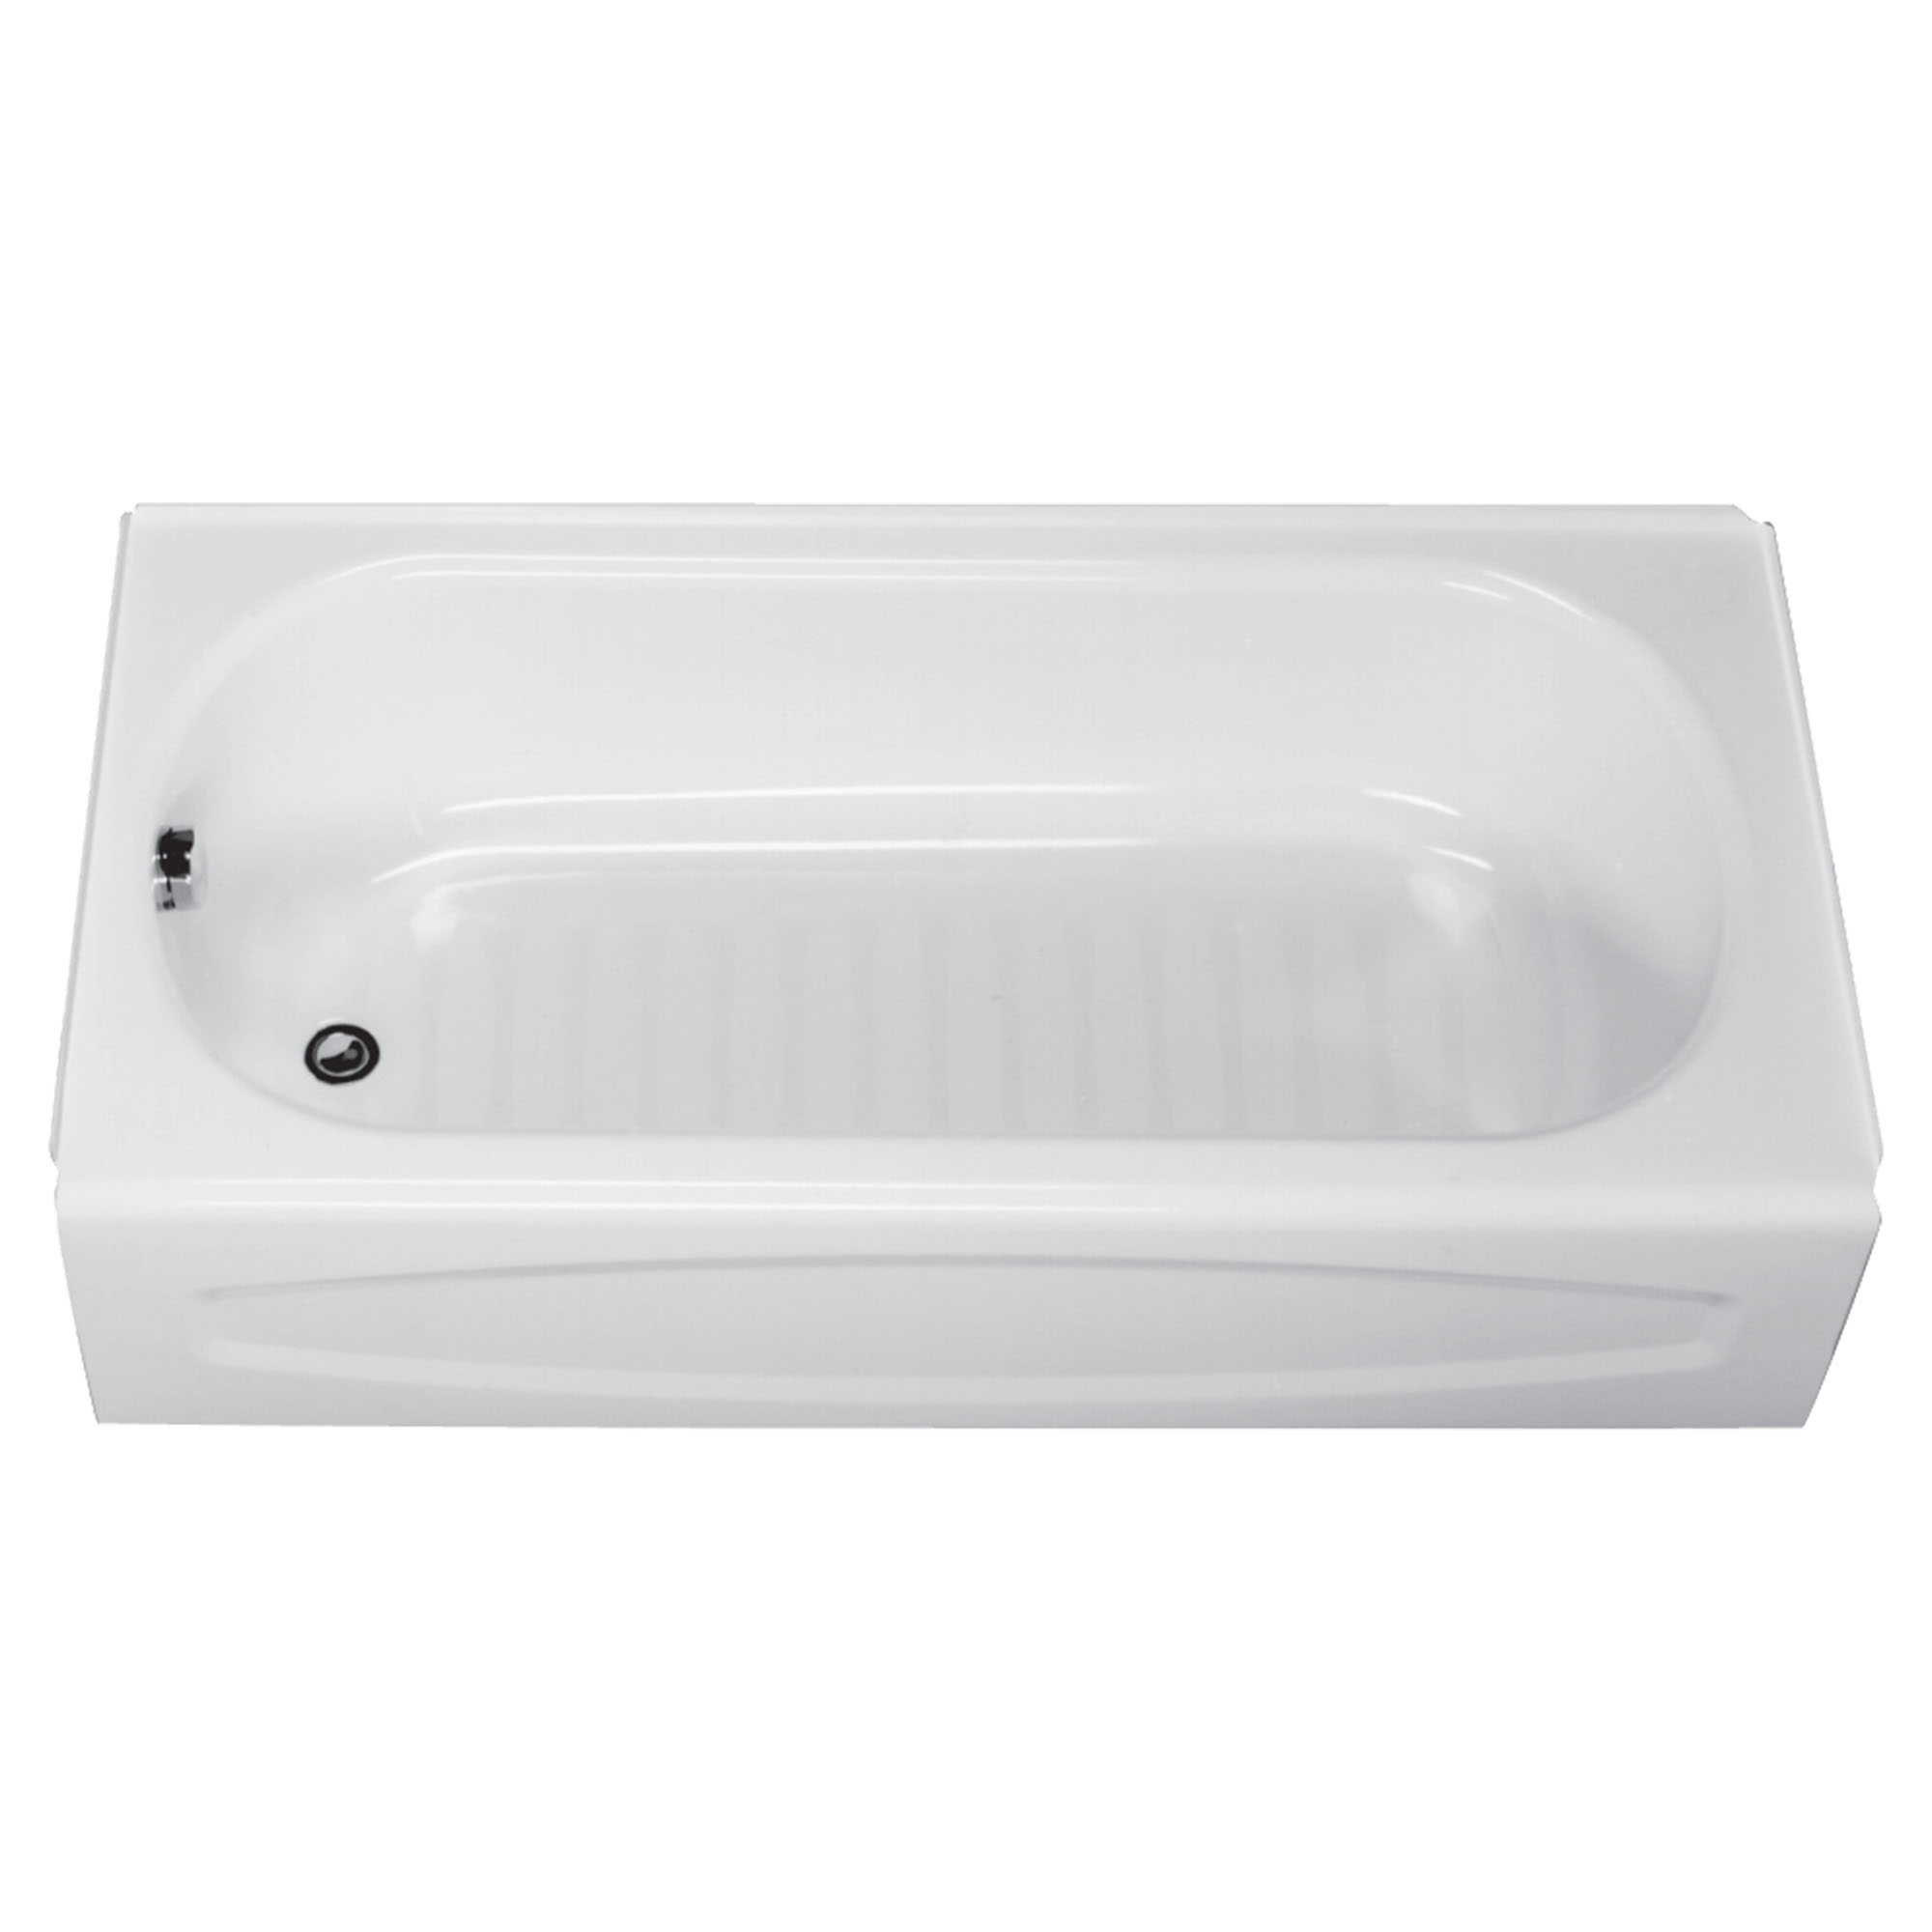 New Salem™ 60 x 30-Inch Integral Apron Bathtub With Left-Hand Outlet